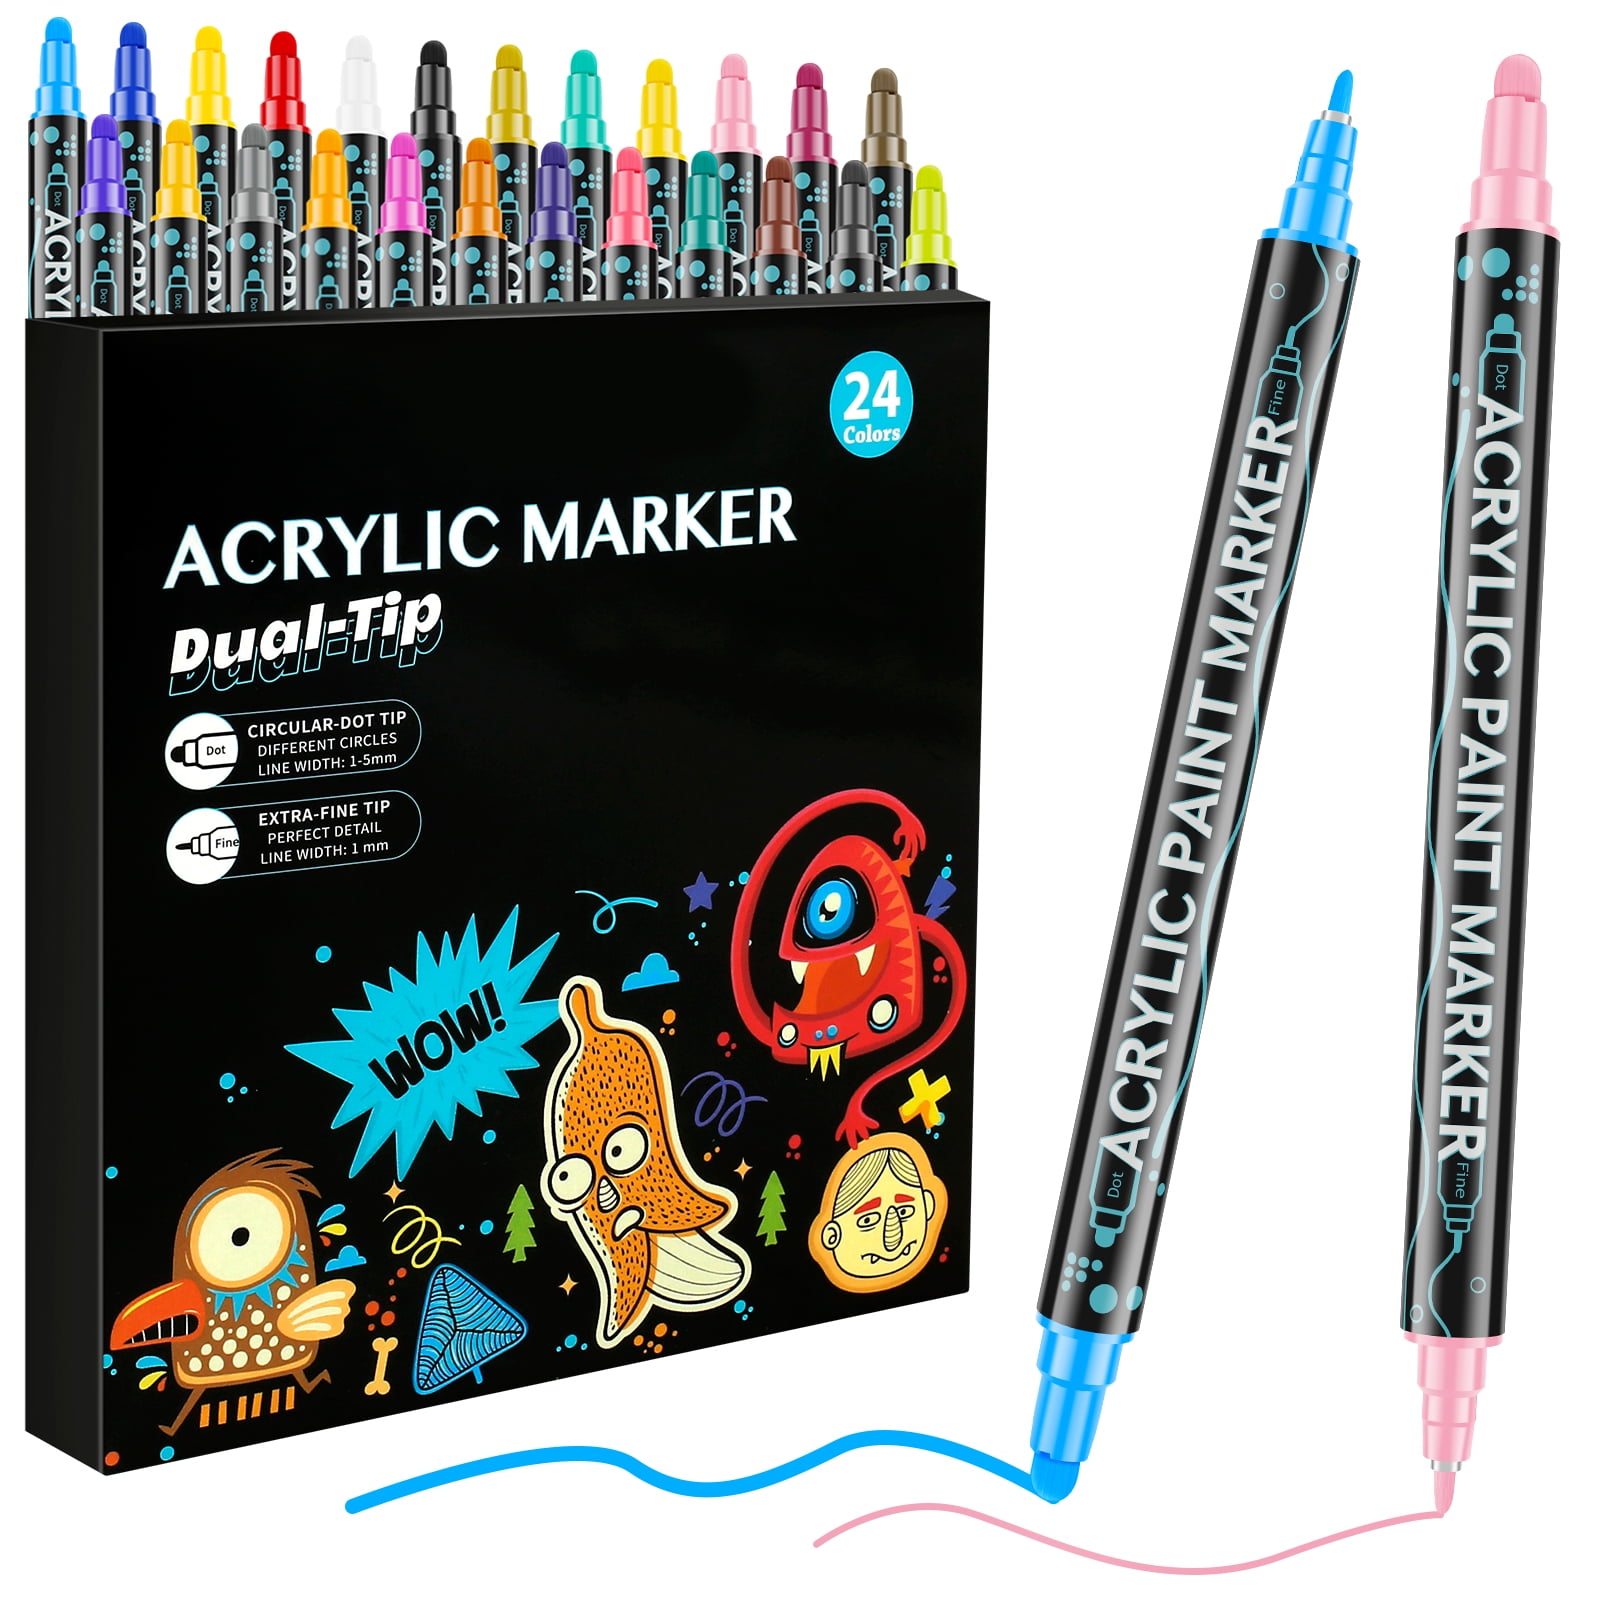 Crafts 4 All crafts 4 all acrylic paint markers set - 12, broad tip-tip  acrylic paint pens for rock painting, glass, wood, canvas and fabr